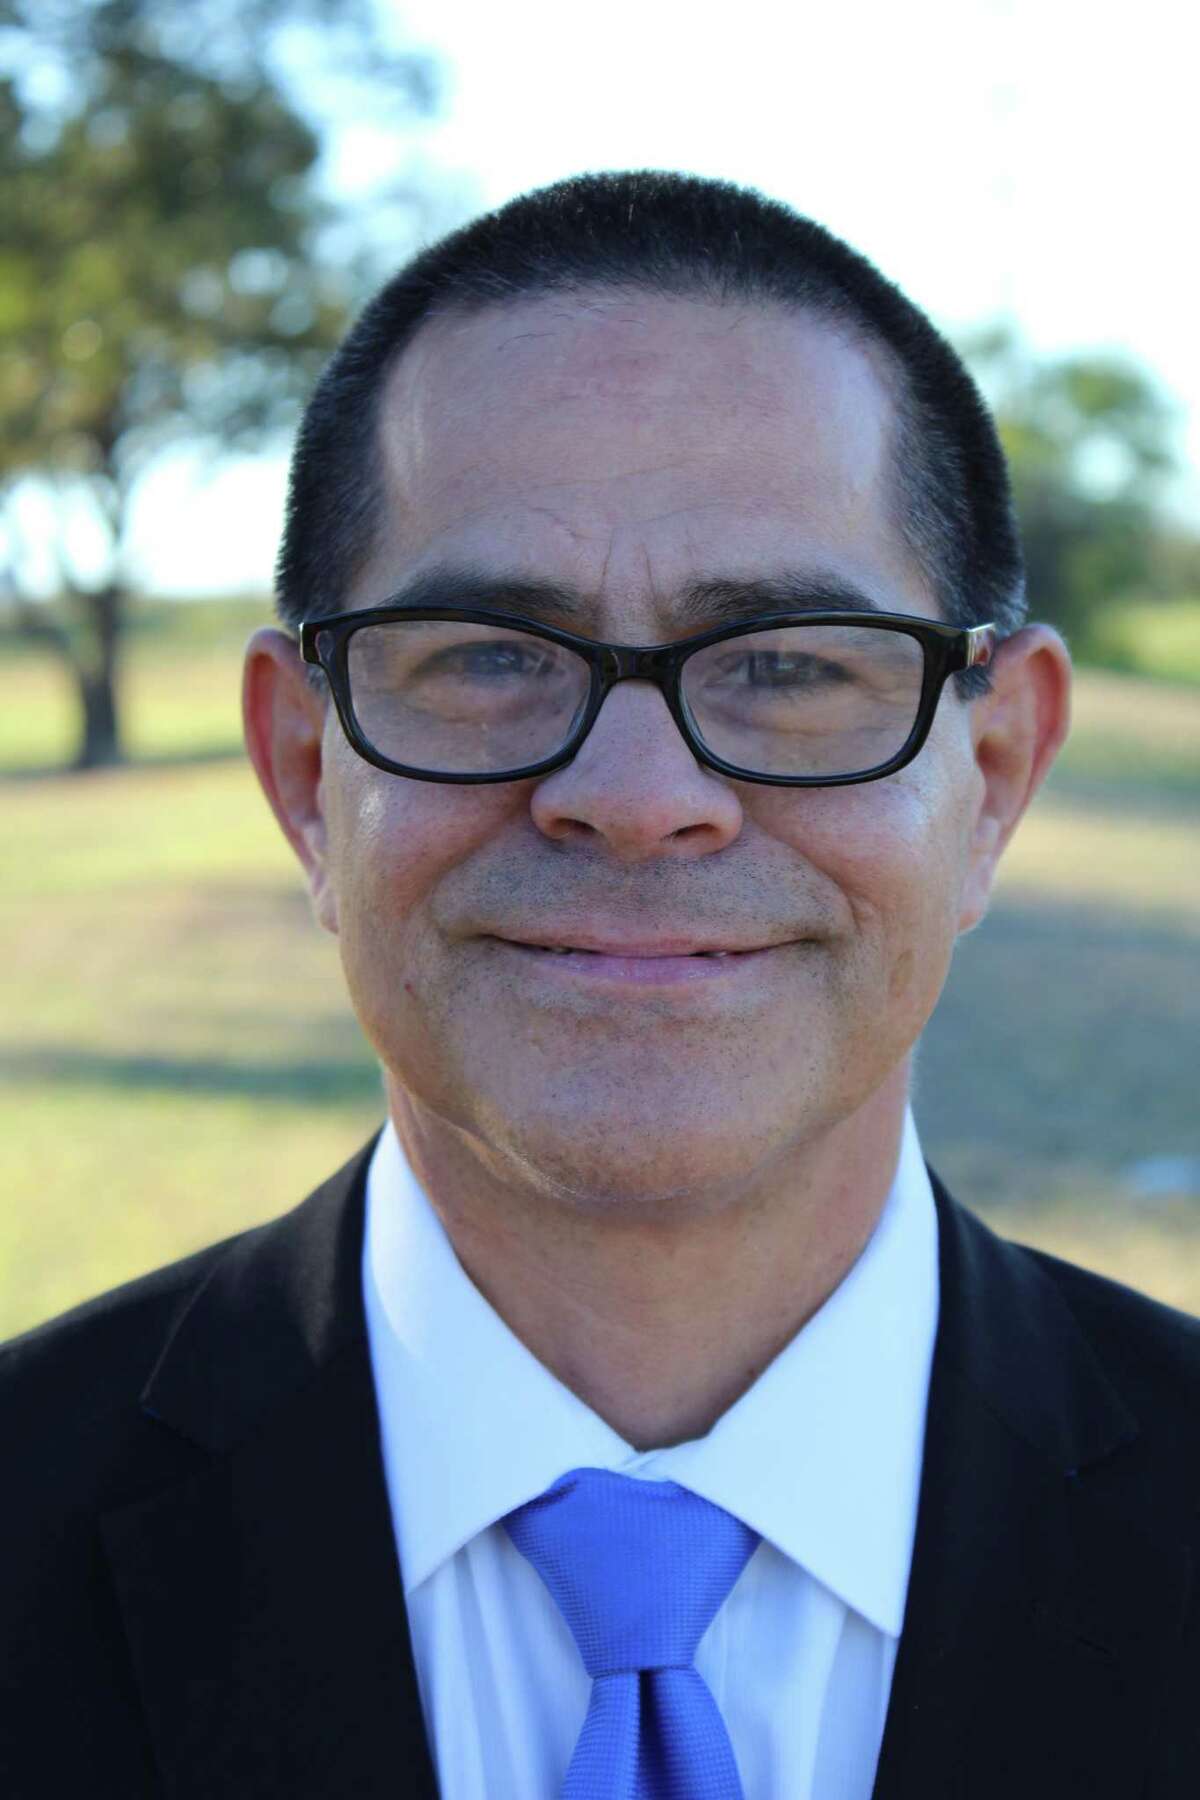 Steve Huerta, a social justice advocate, is running in the special election to fill the vacant District 125 seat in the Texas House.